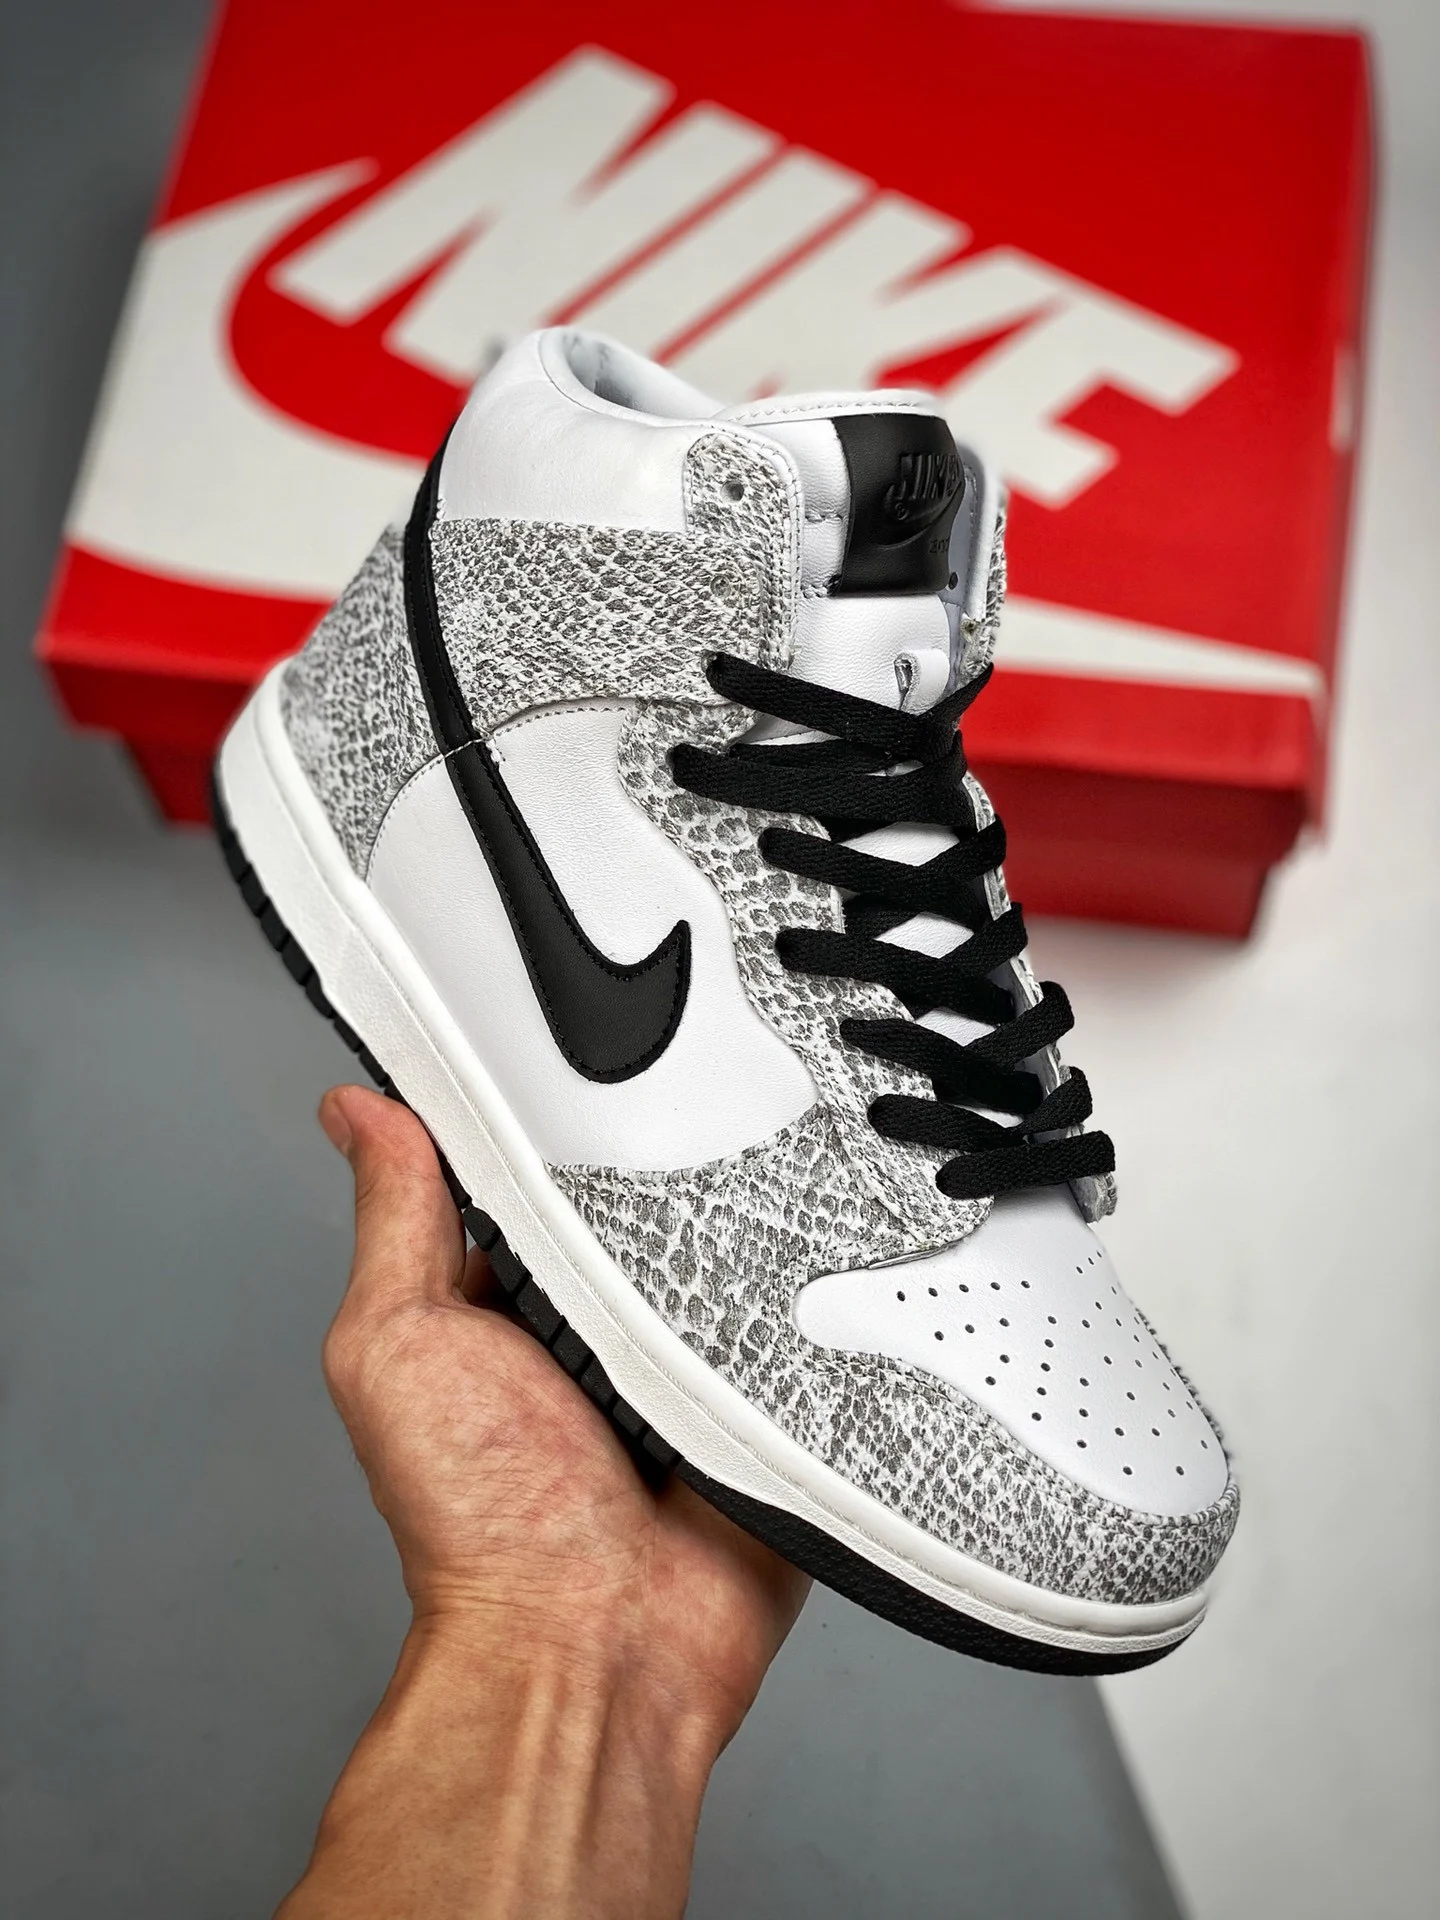 Nike Dunk High PRM SP Cocoa Snake Black White-Cocoa For Sale